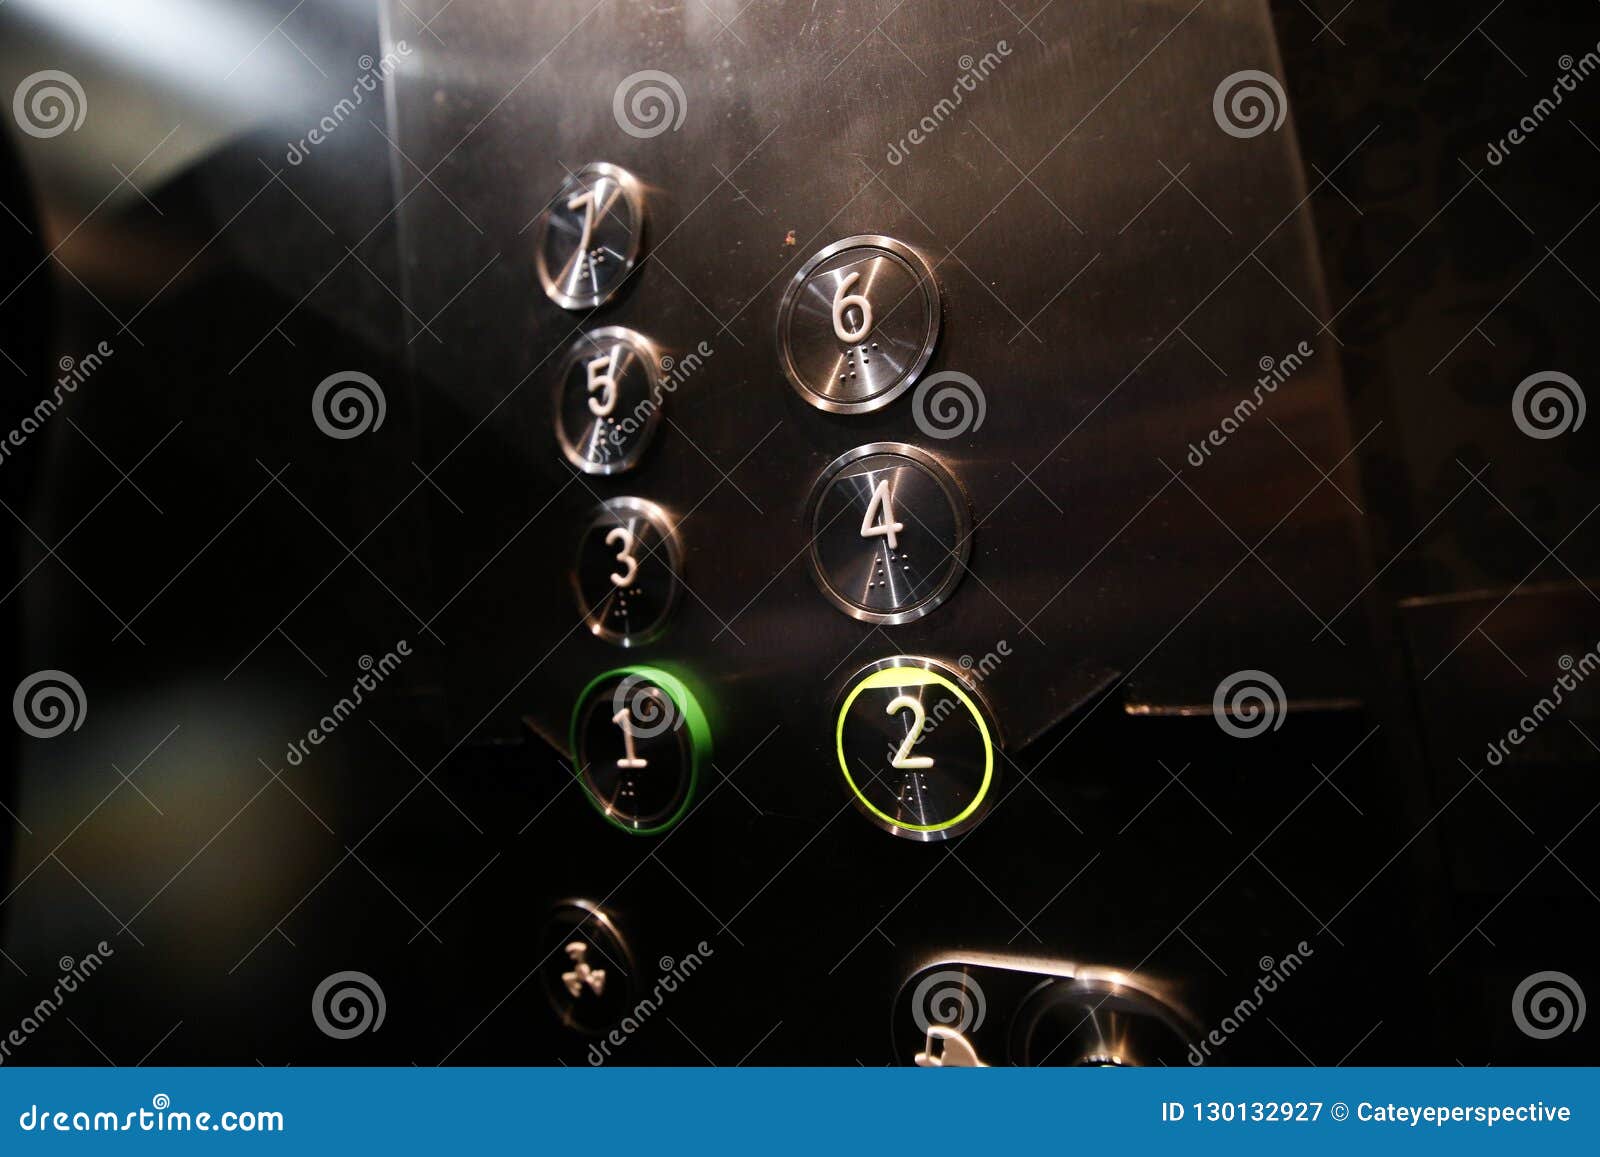 Braille Elevator Numbers Stock Image Image Of Restaurant 130132927